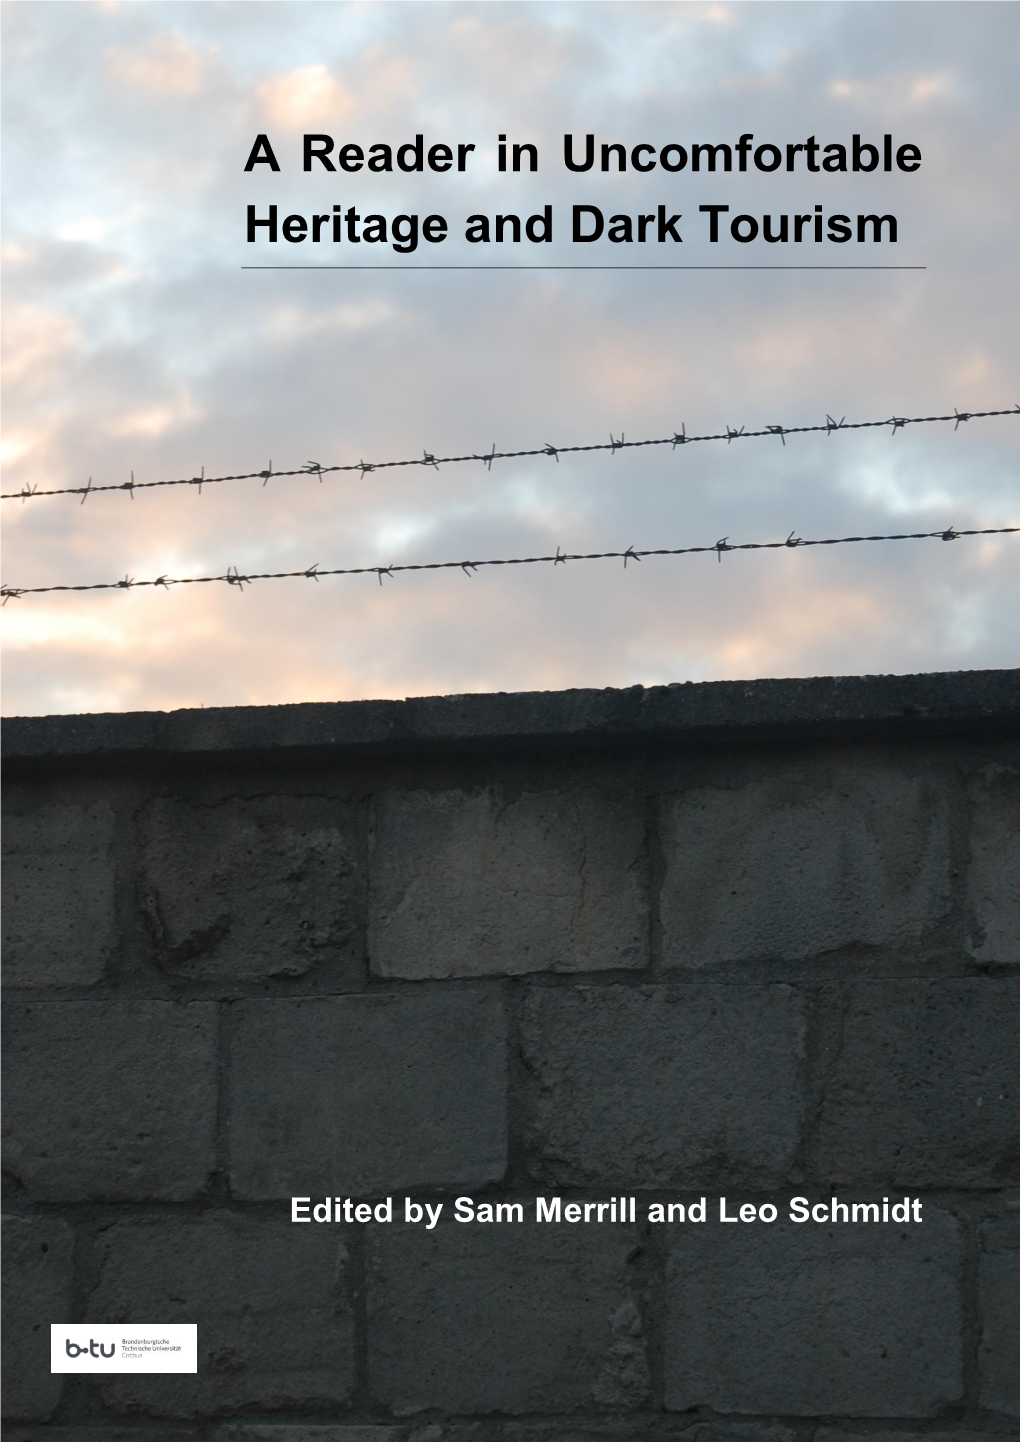 A Reader in Uncomfortable Heritage and Dark Tourism